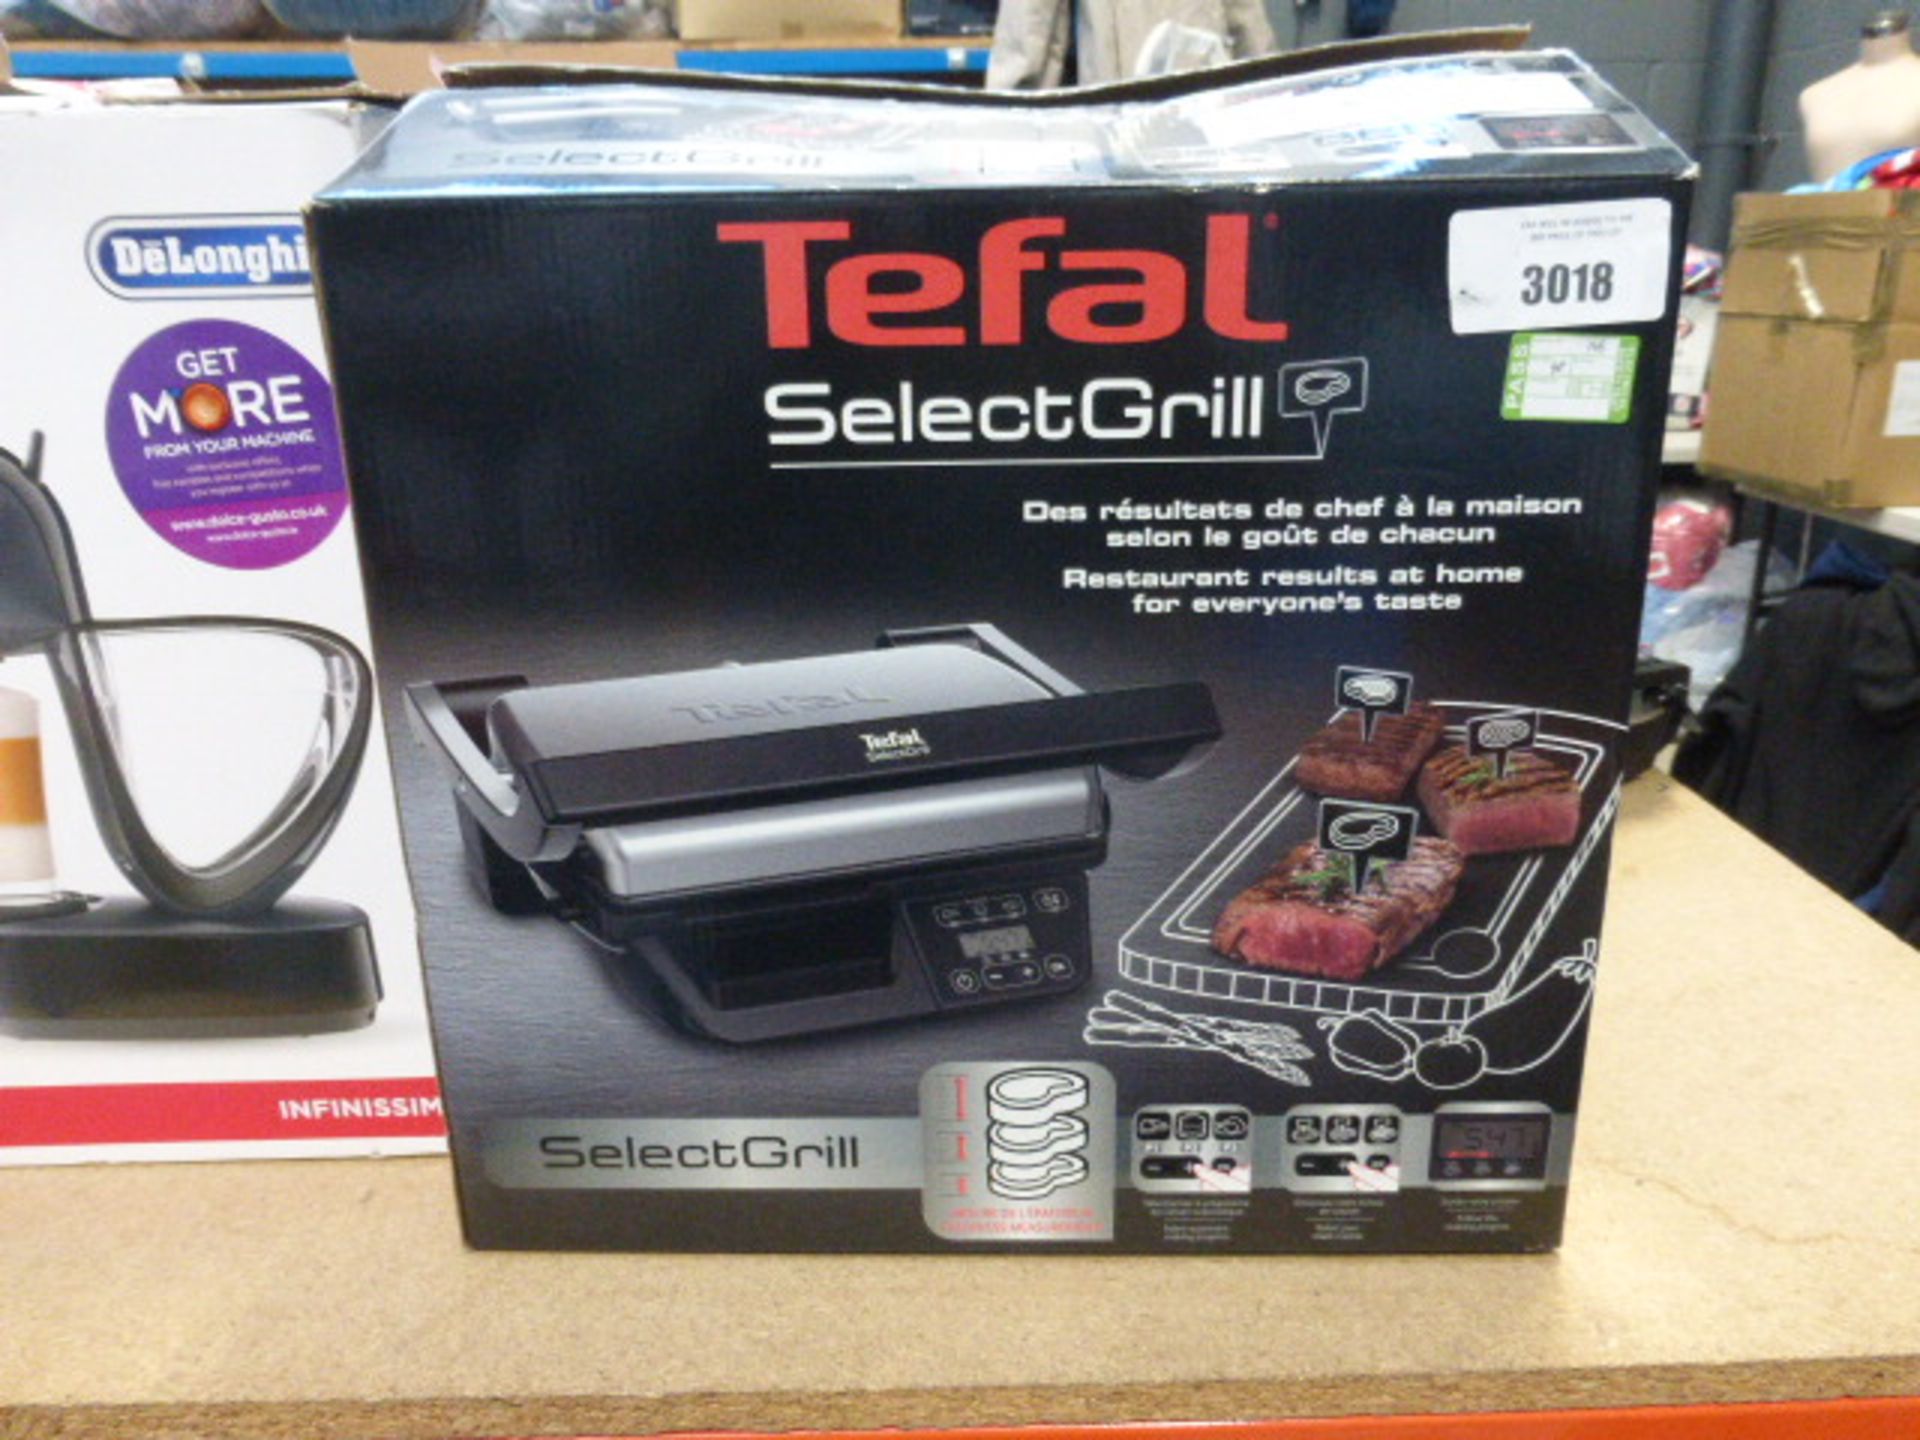 A boxed Tefal select grill